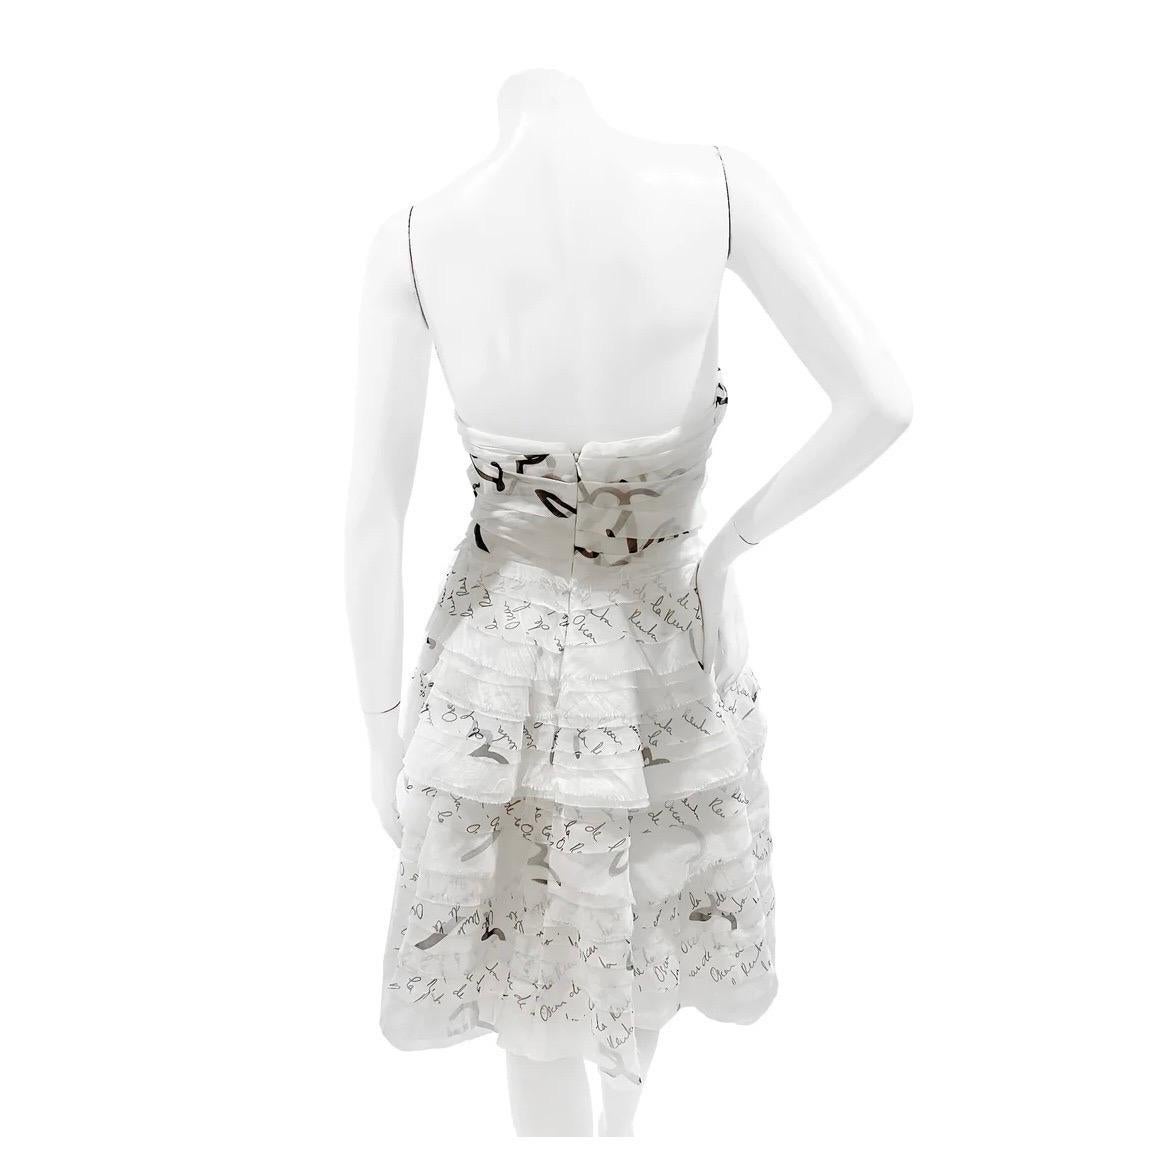 Black and White Logo Tiered Dress by Oscar de la Renta
Spring / Summer 2018
Made in USA
Black and White 
ODLR logo print detail
Corset top
Strapless
Layered tier style 
Built in padded breast cups
Back invisible zipper closure with clasp
Fabric